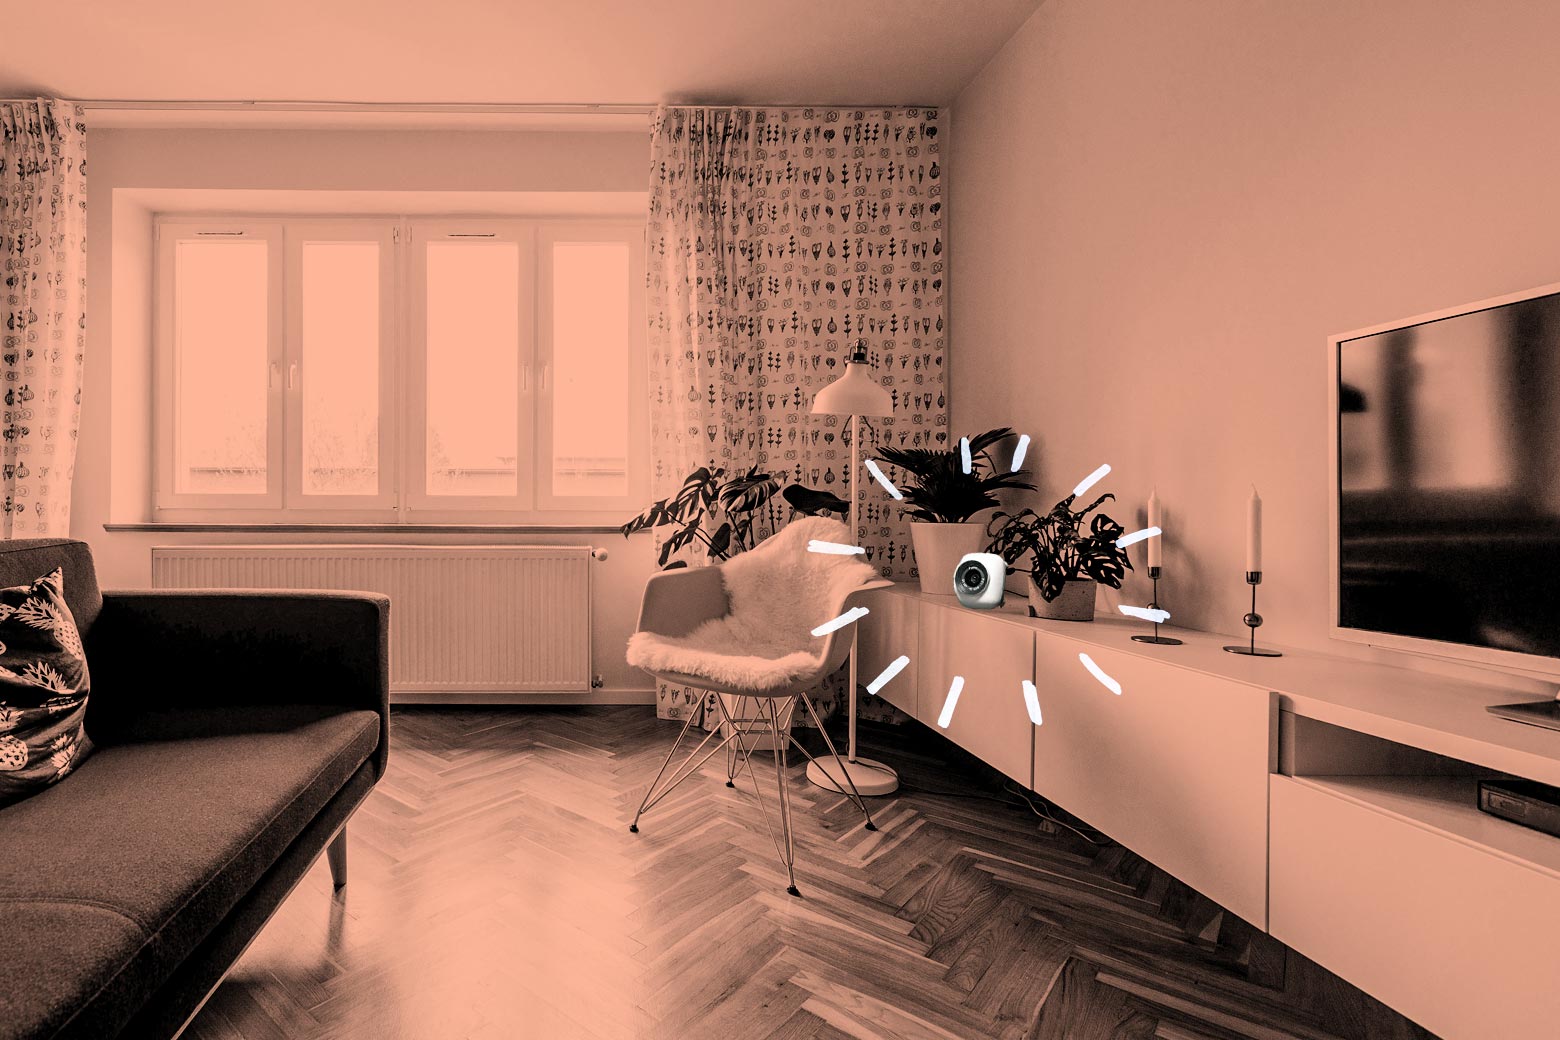 Photo collage of a living room with a hidden camera highlighted. 